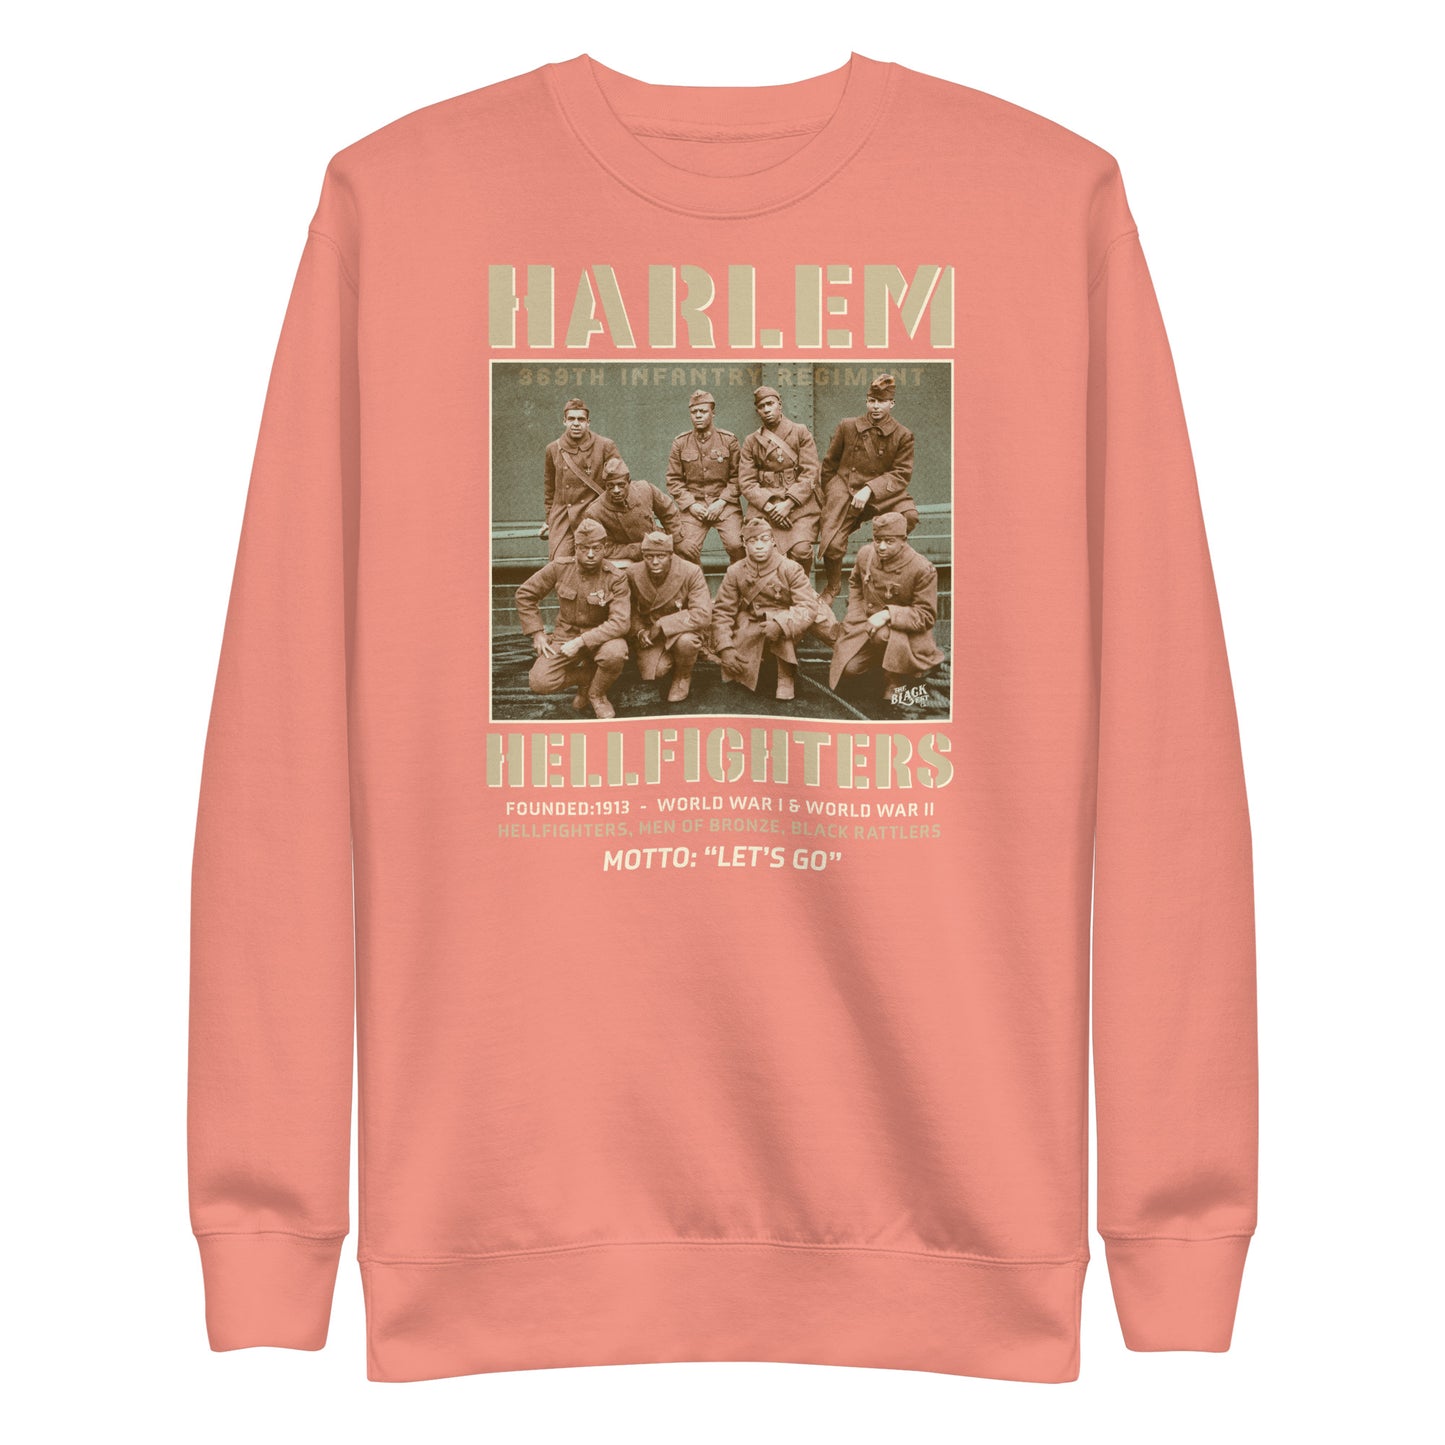 coral pink premium sweatshirt with a vintage image of wwi soldiers with text that reads harlem hellfighters